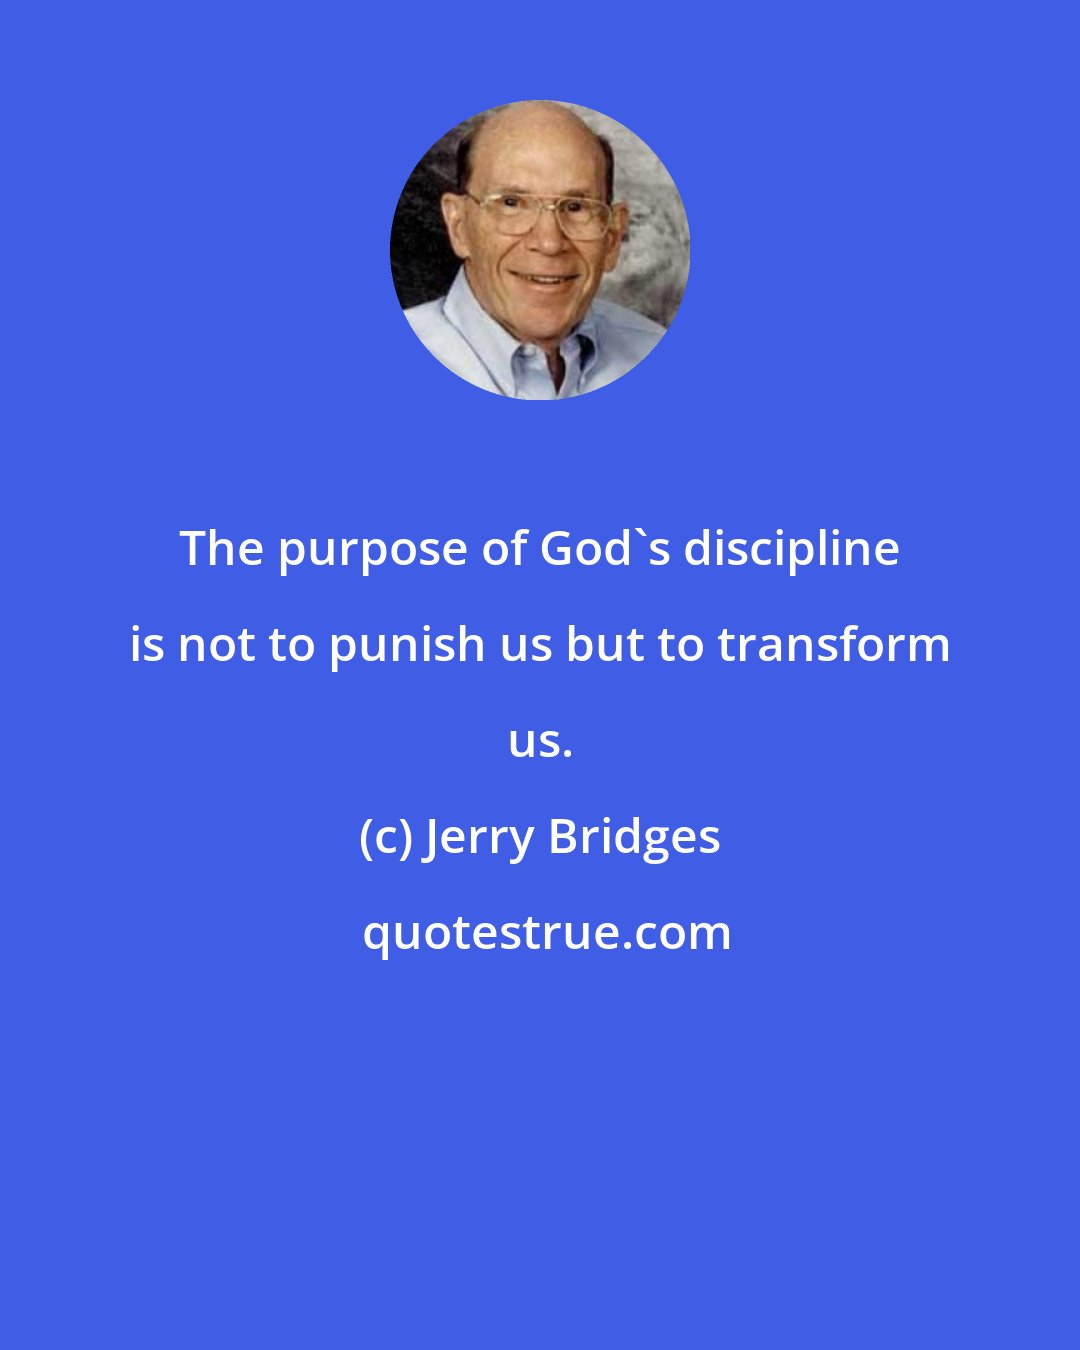 Jerry Bridges: The purpose of God's discipline is not to punish us but to transform us.